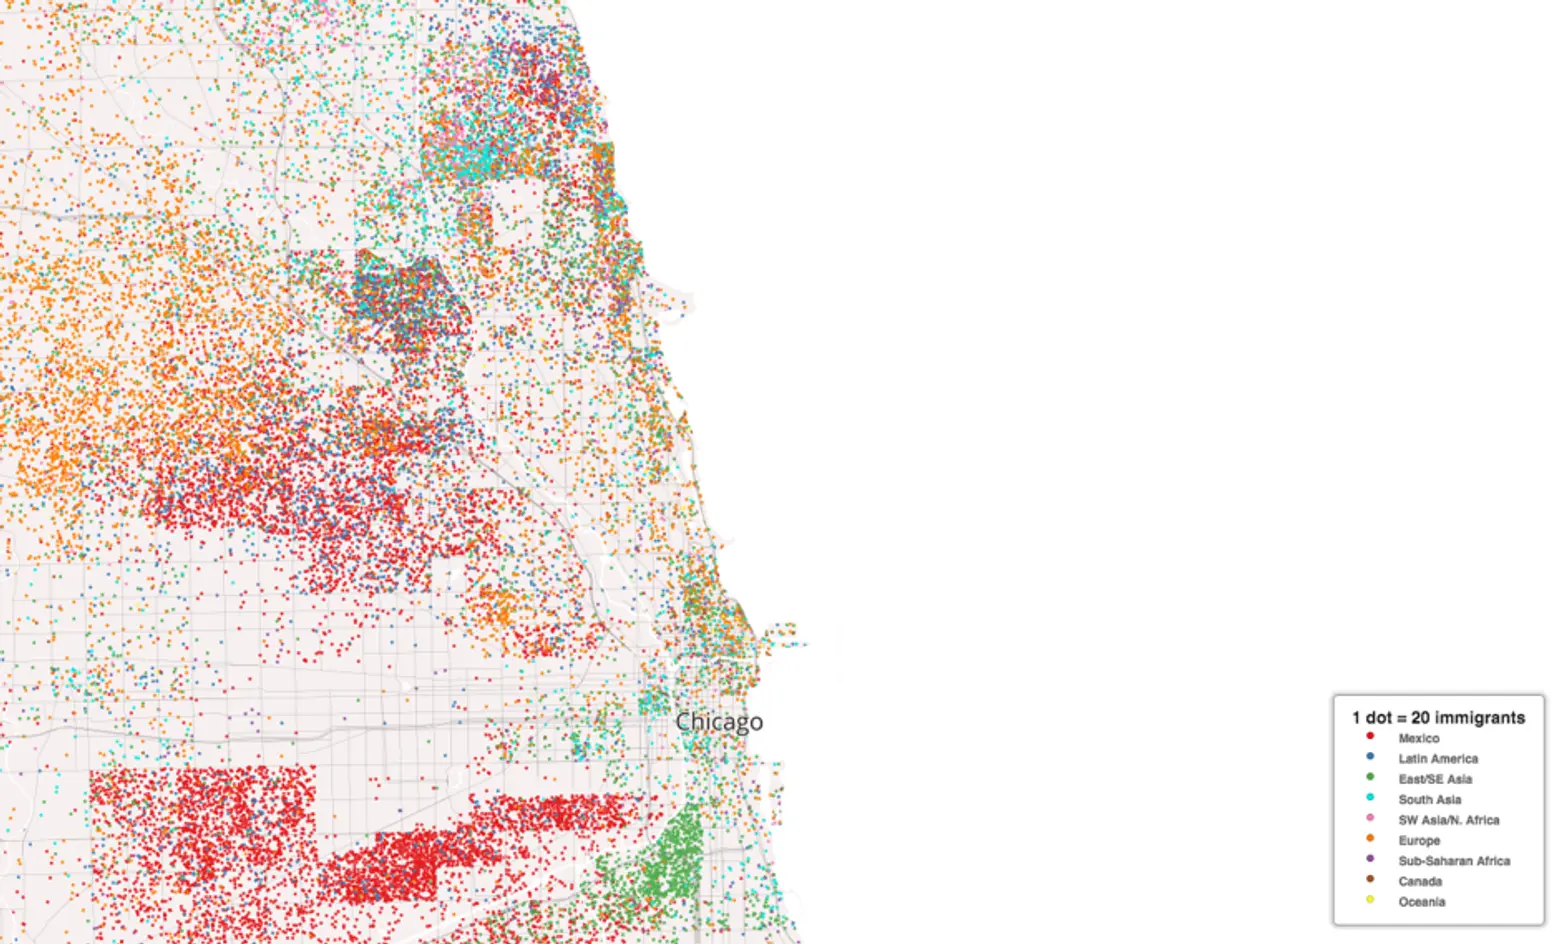 Mapping Immigrant America, Kyle Walker, immigration map, Chicago population map